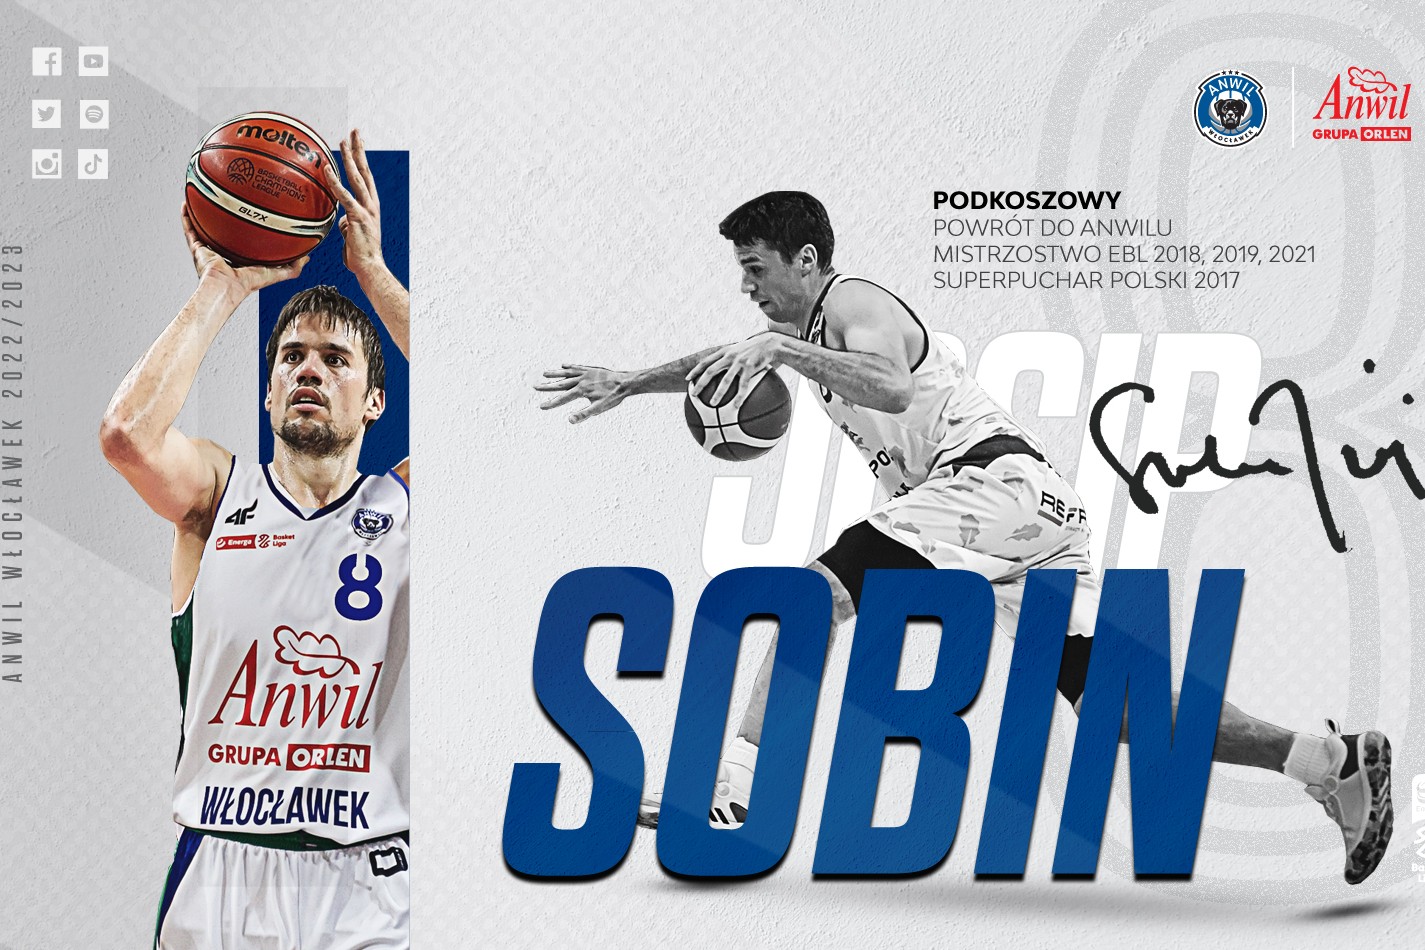 The Bear Comes Back - Josip Sobin In Anwil!